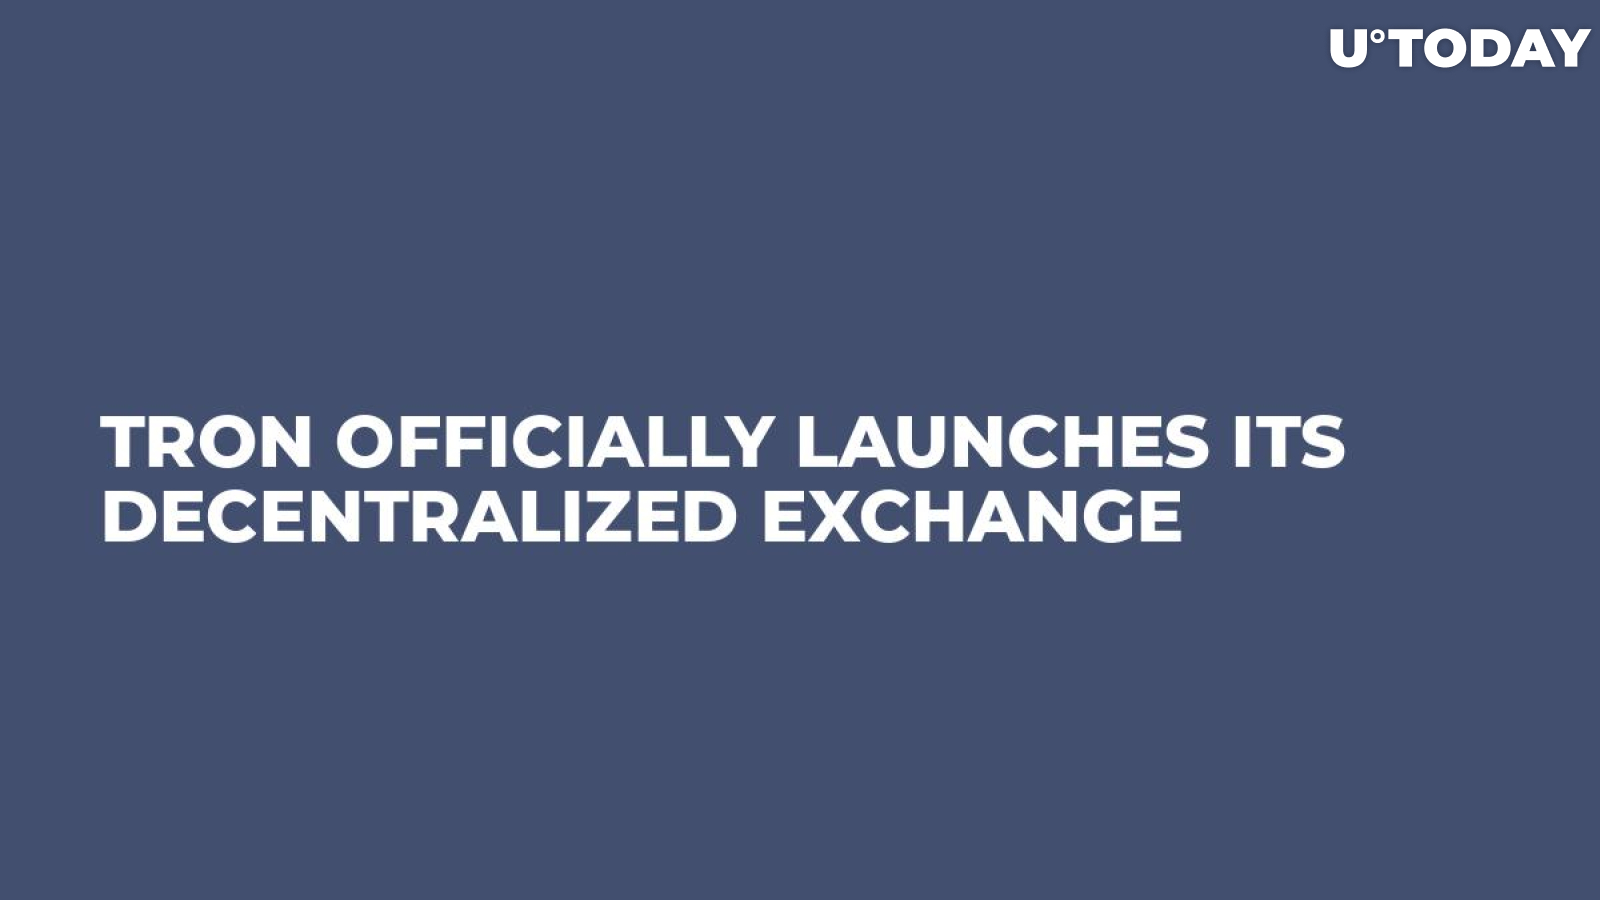 Tron Officially Launches Its Decentralized Exchange